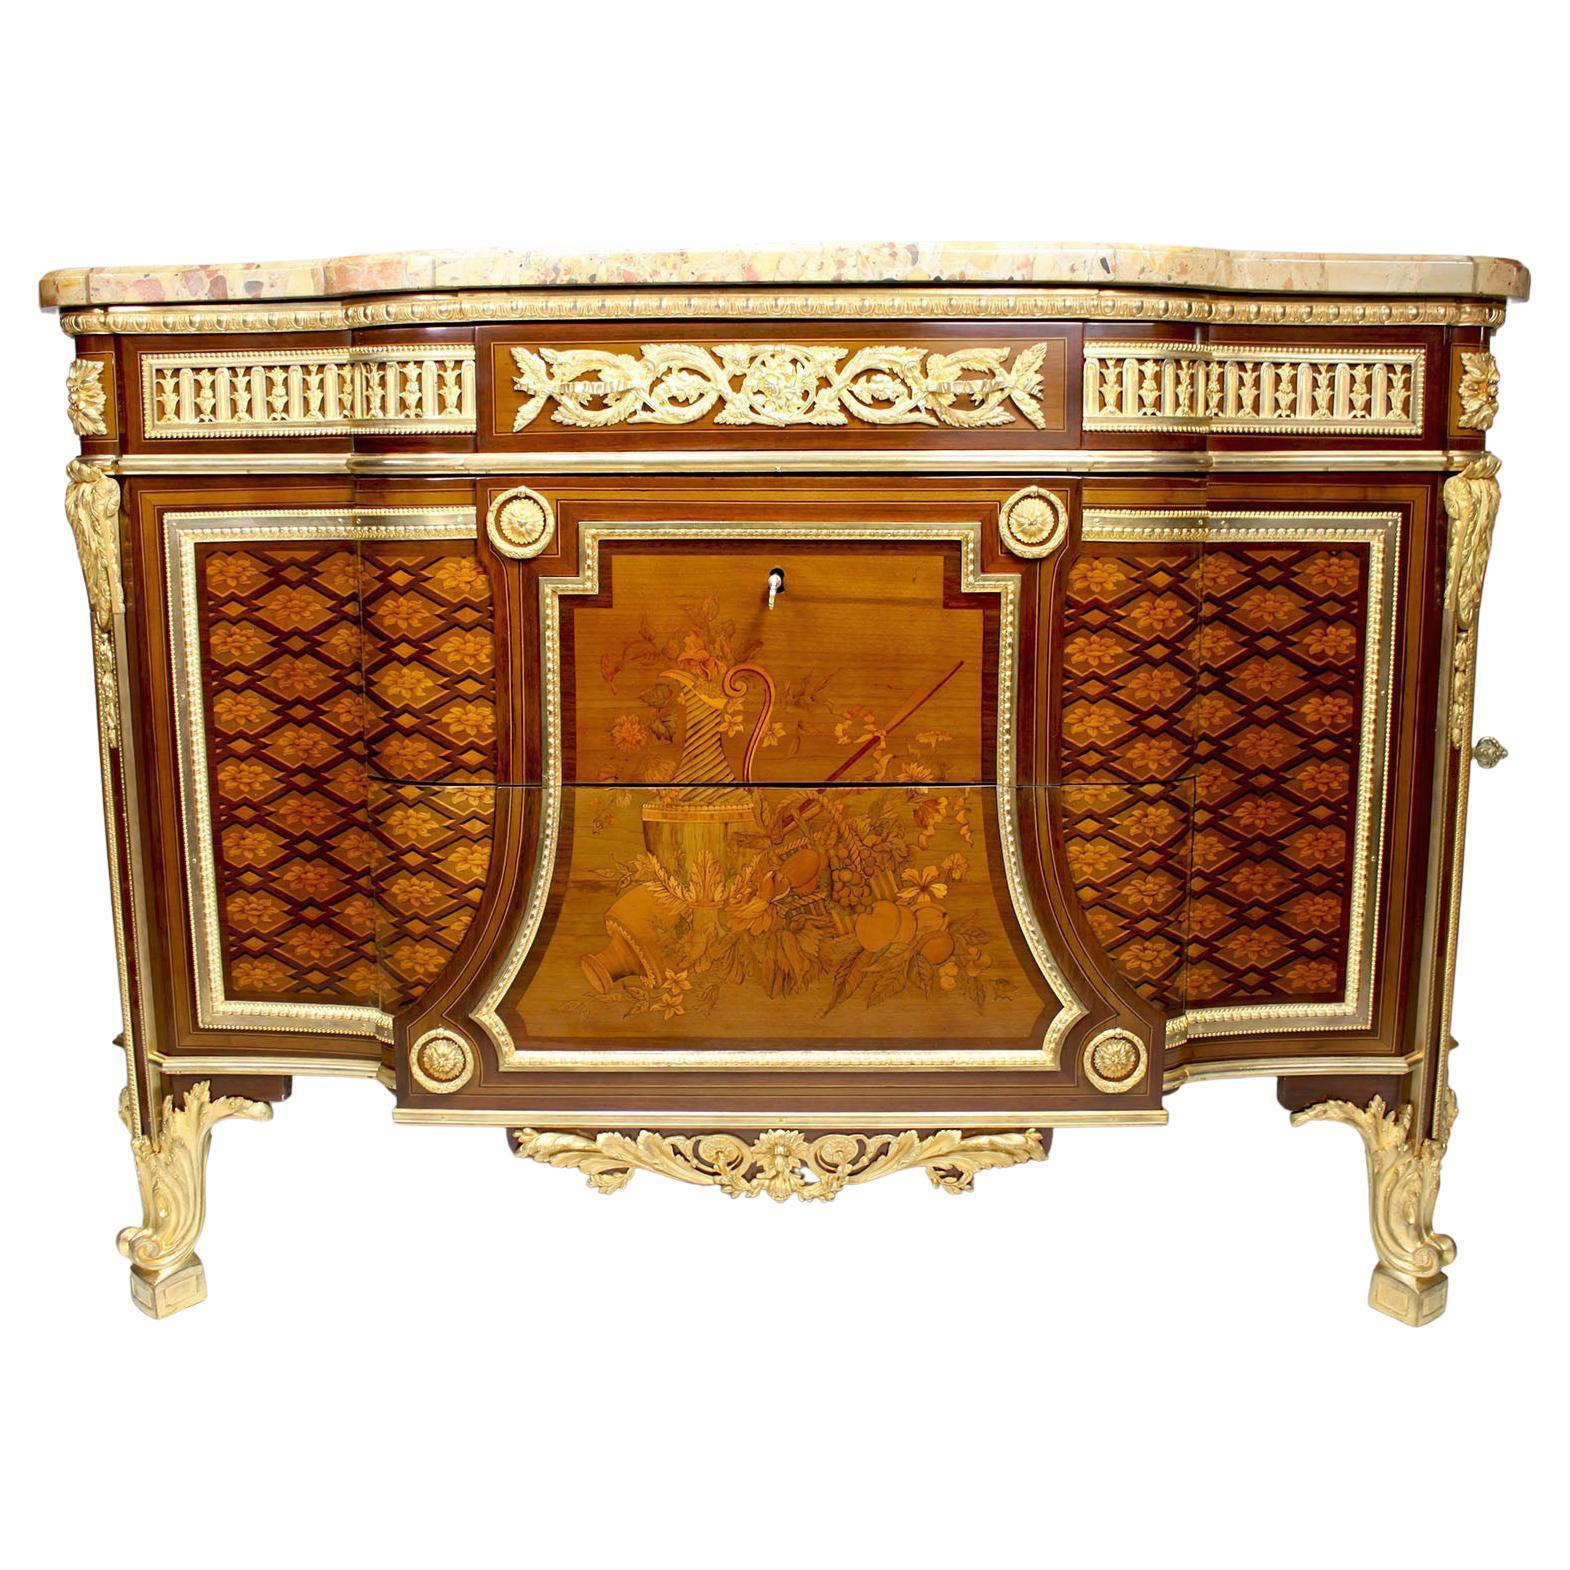 French 19th Century Louis XV-XVI Ormolu Mounted Marquetry Commode Marble Top